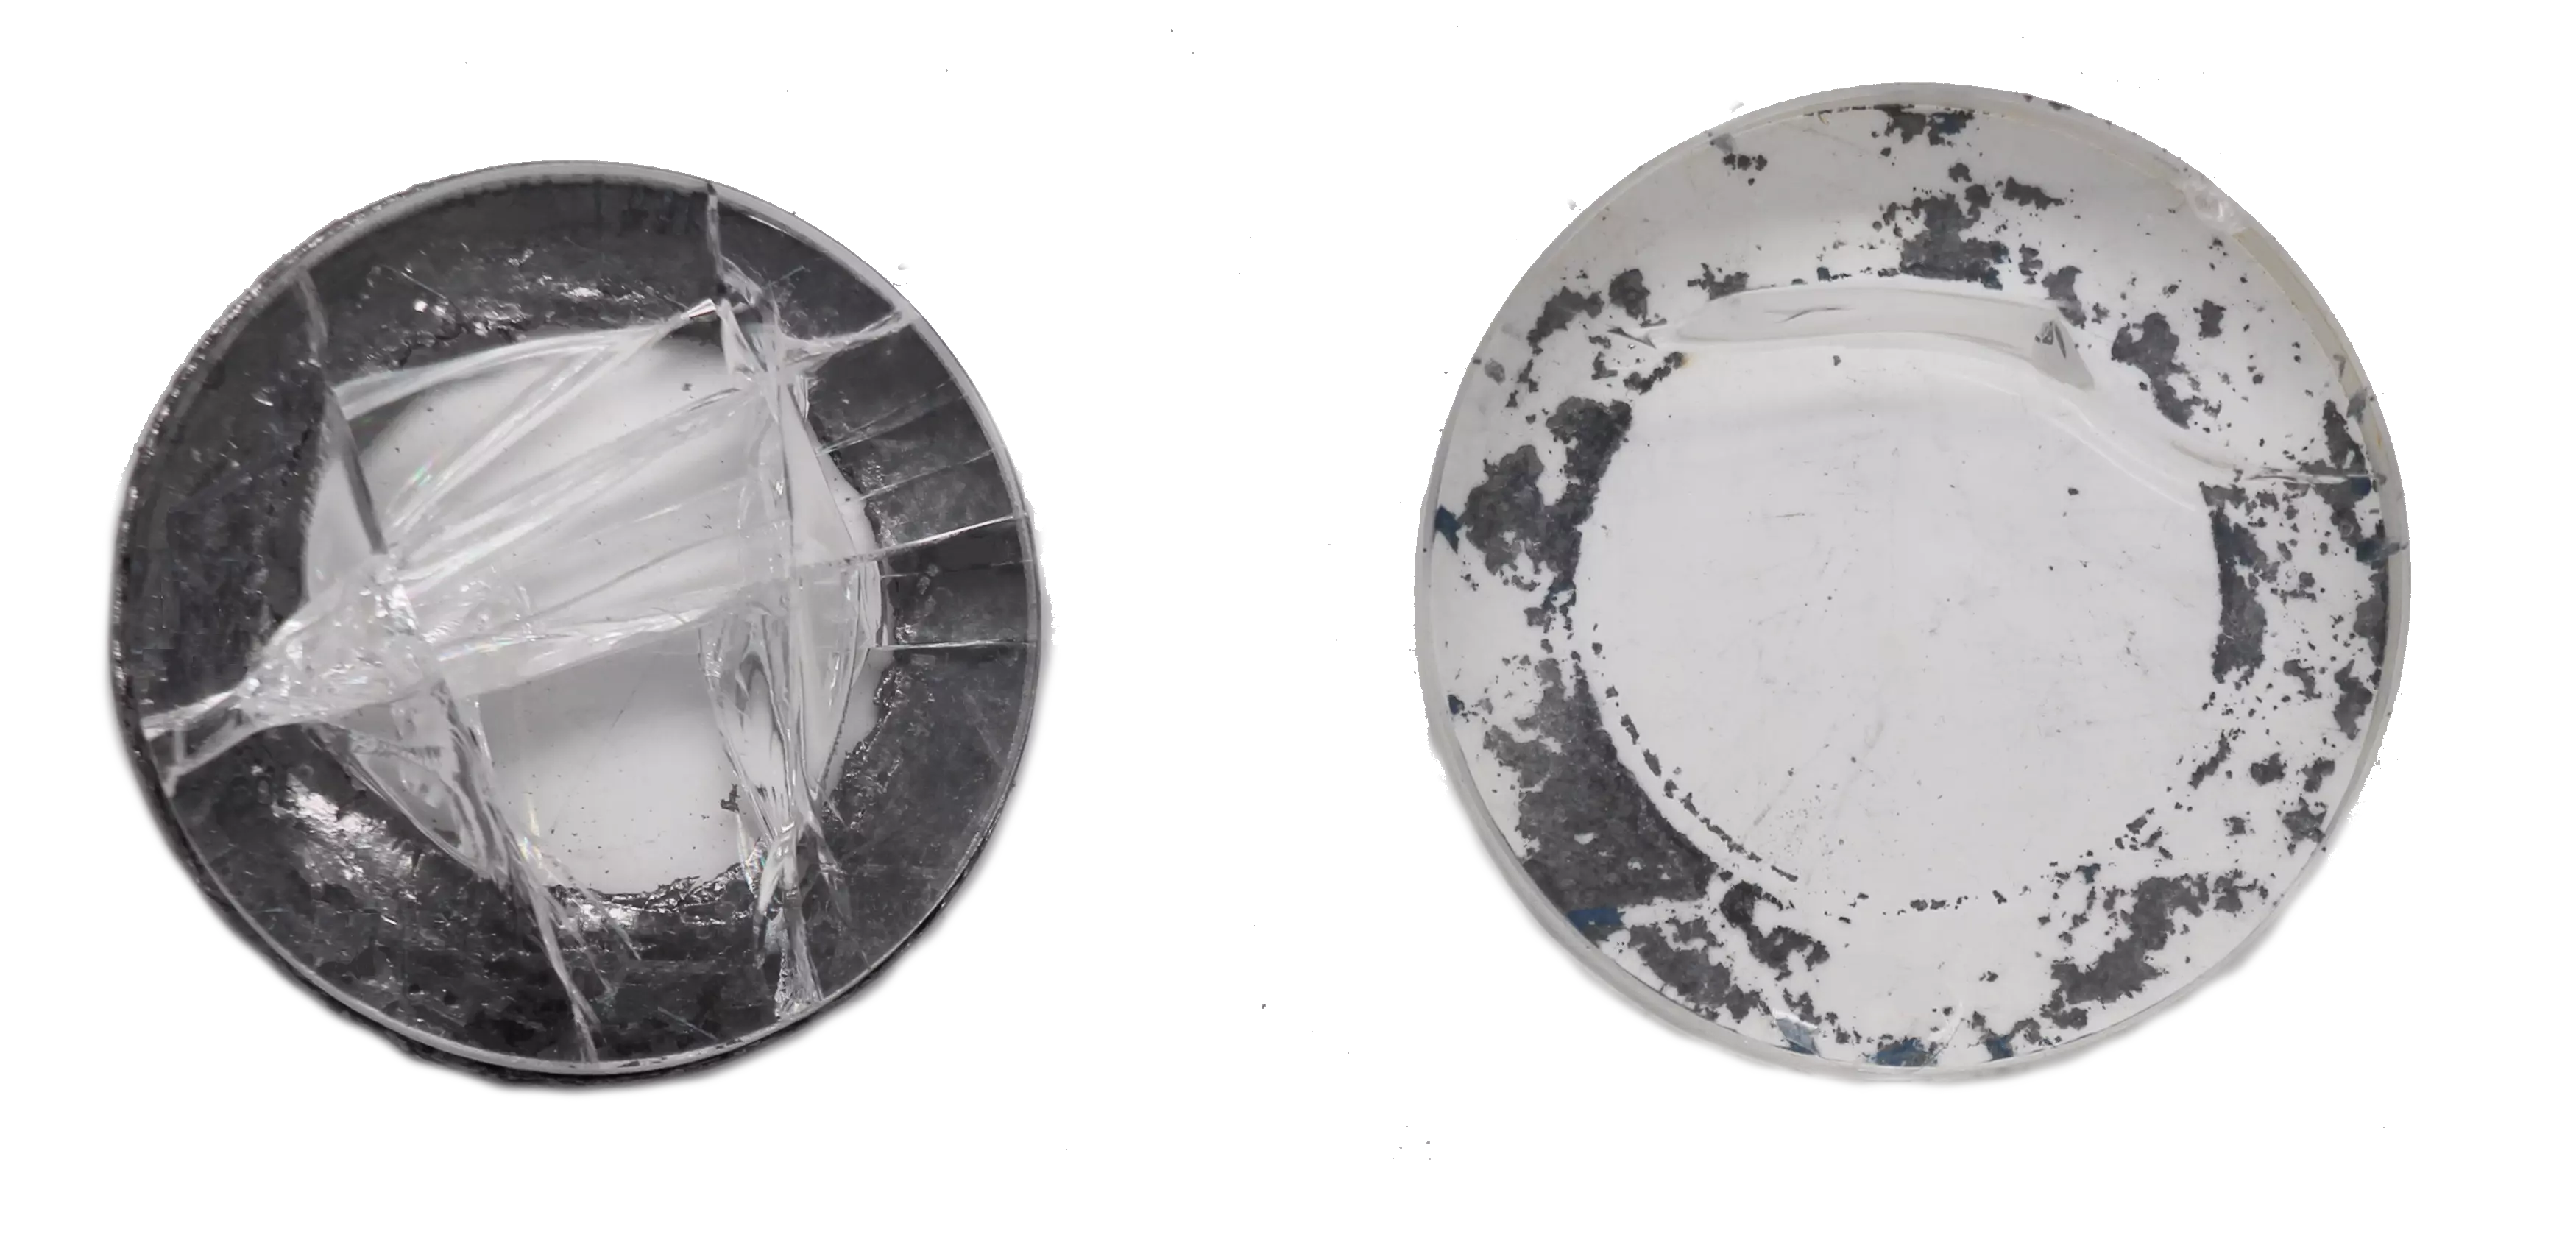 Figure 5: Damaged glass plates with standard graphite gasket